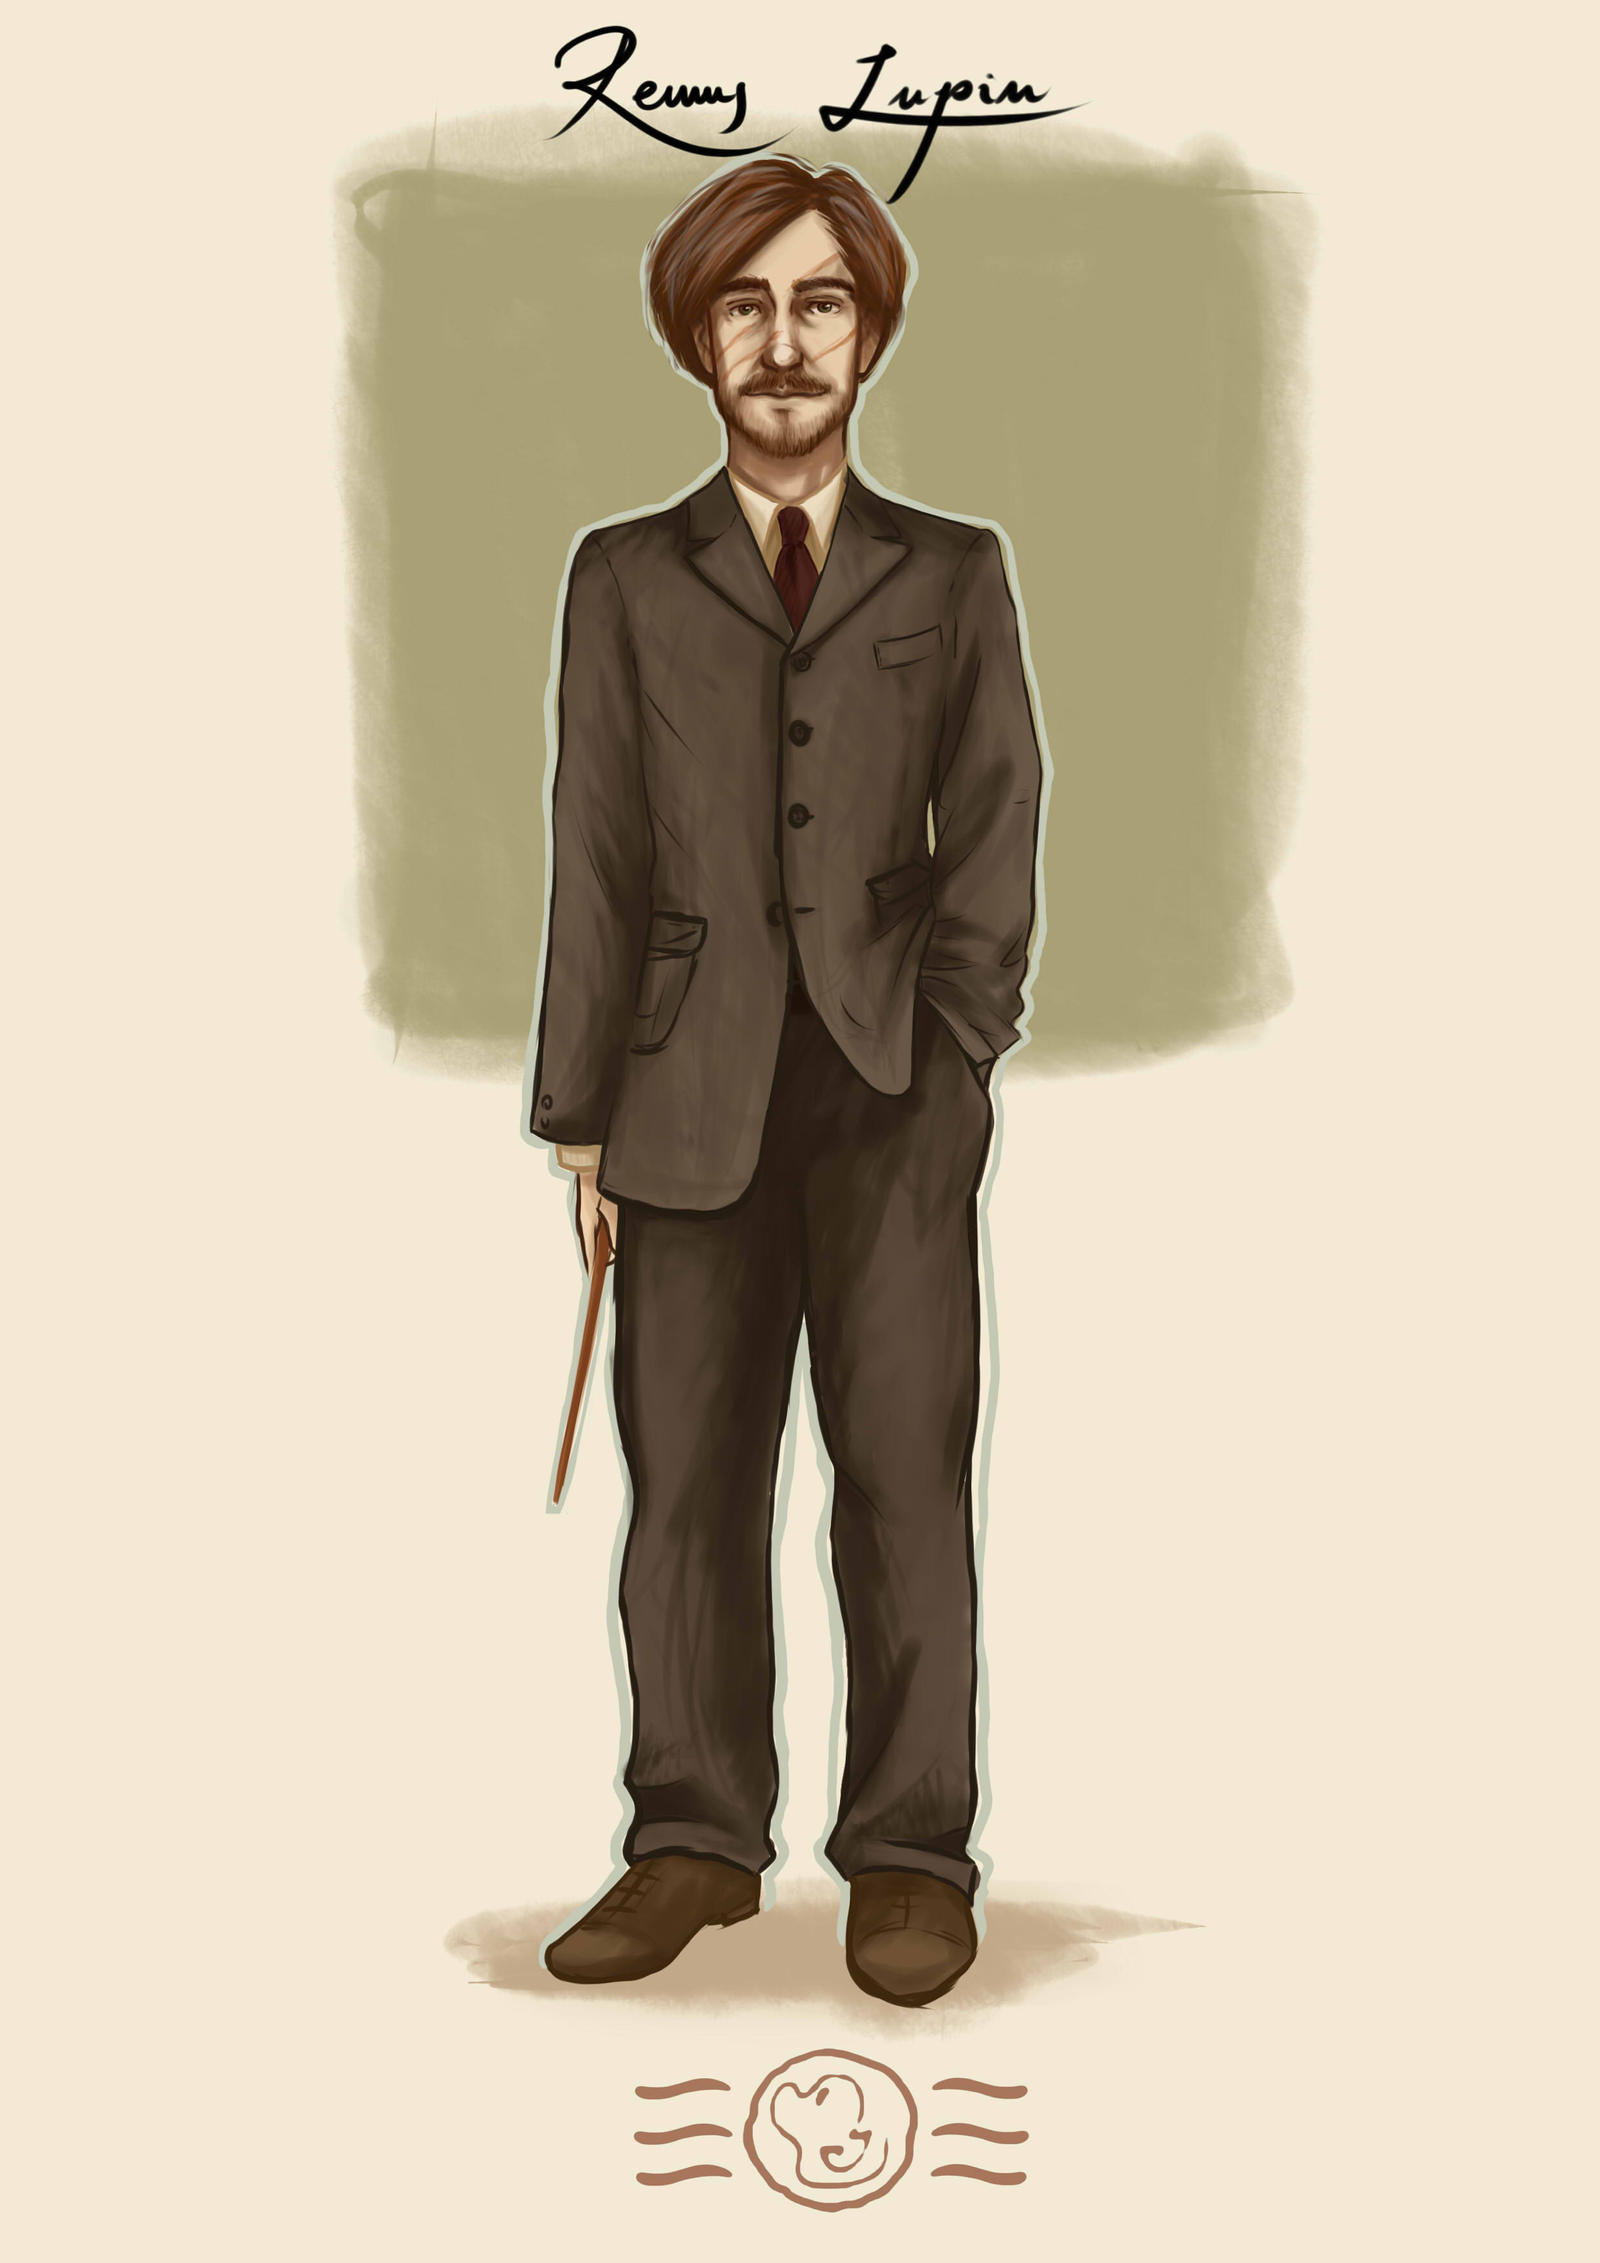 Order of the Phoenix - Remus Lupin